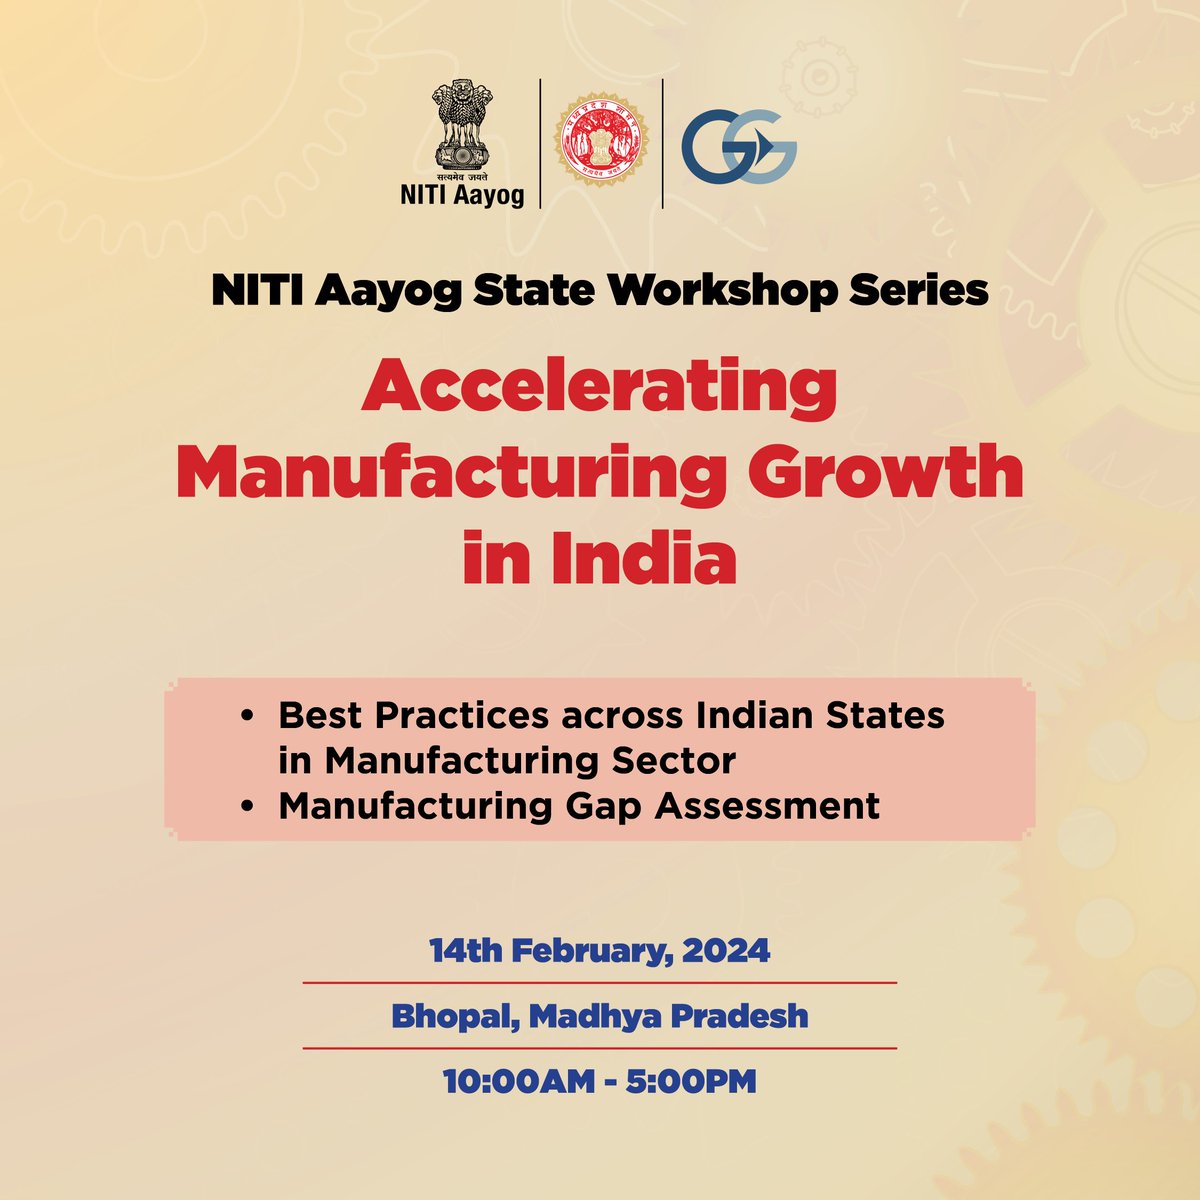 NITI Aayog, in collaboration with the Government of #MadhyaPradesh and @AIGGPA, is organizing a pivotal workshop on 'Accelerating Manufacturing Growth in India' on February 14, 2024, in Bhopal, Madhya Pradesh. This workshop aims to chart a course towards bolstering the…